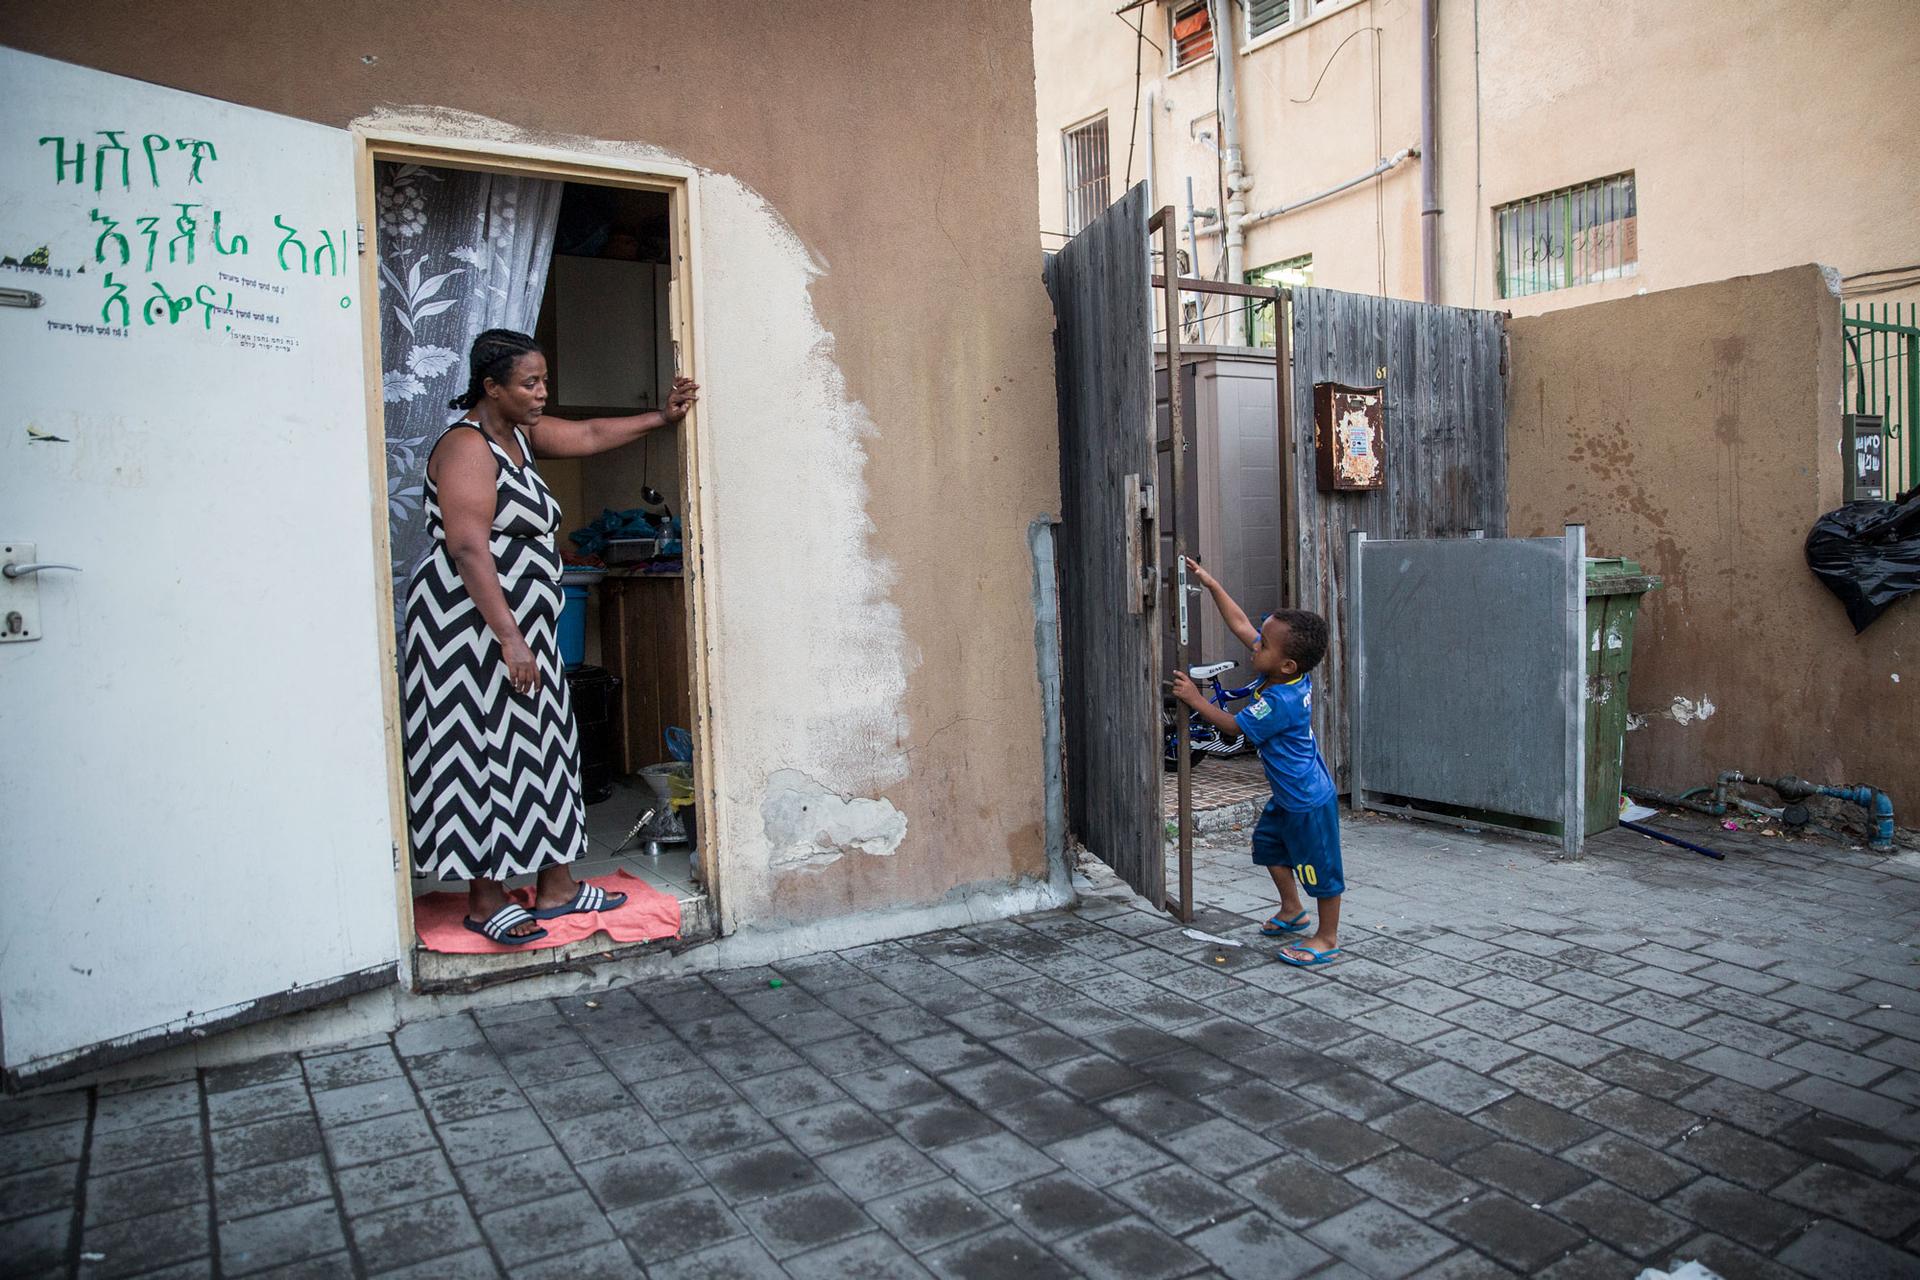 Tariki Gebru, 4, speaks with a neighbor, Ethiopian-Israeli Mazal Kfyalew. She immigrated to Israel in the 1990s and sells the traditional flatbread ingera, which she oftentimes brings to Gebru and her sons. She says she pities them living in such difficul